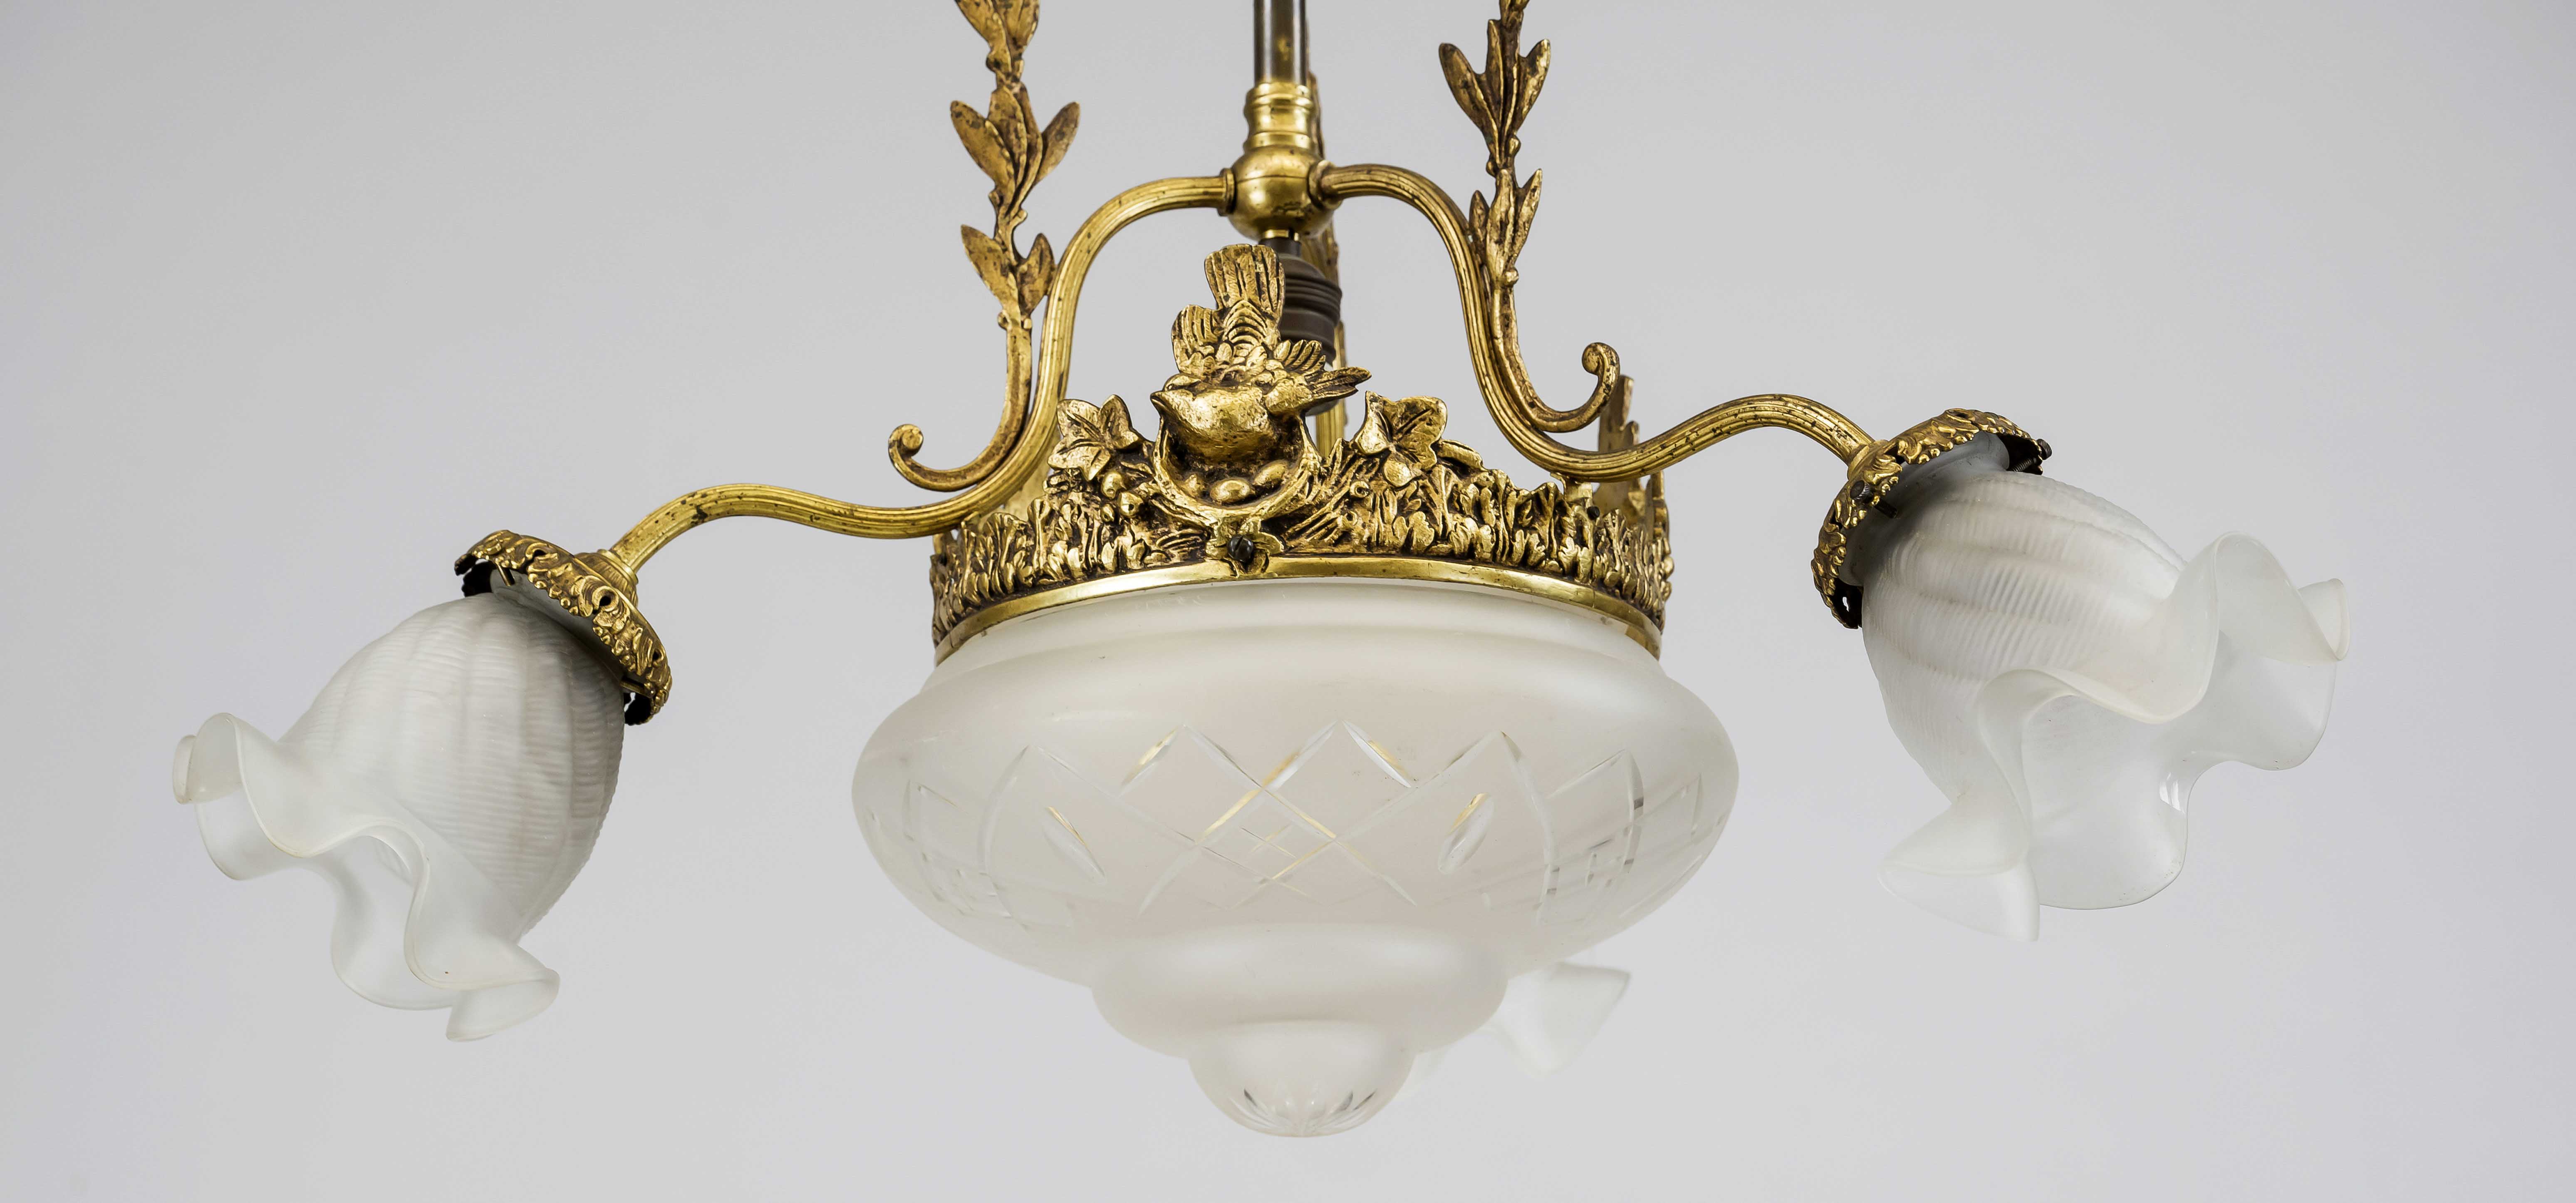 Ceiling lamp, late 19th century Ornamented brass wreath on 3 curved stems on a long shaft with - Image 3 of 3